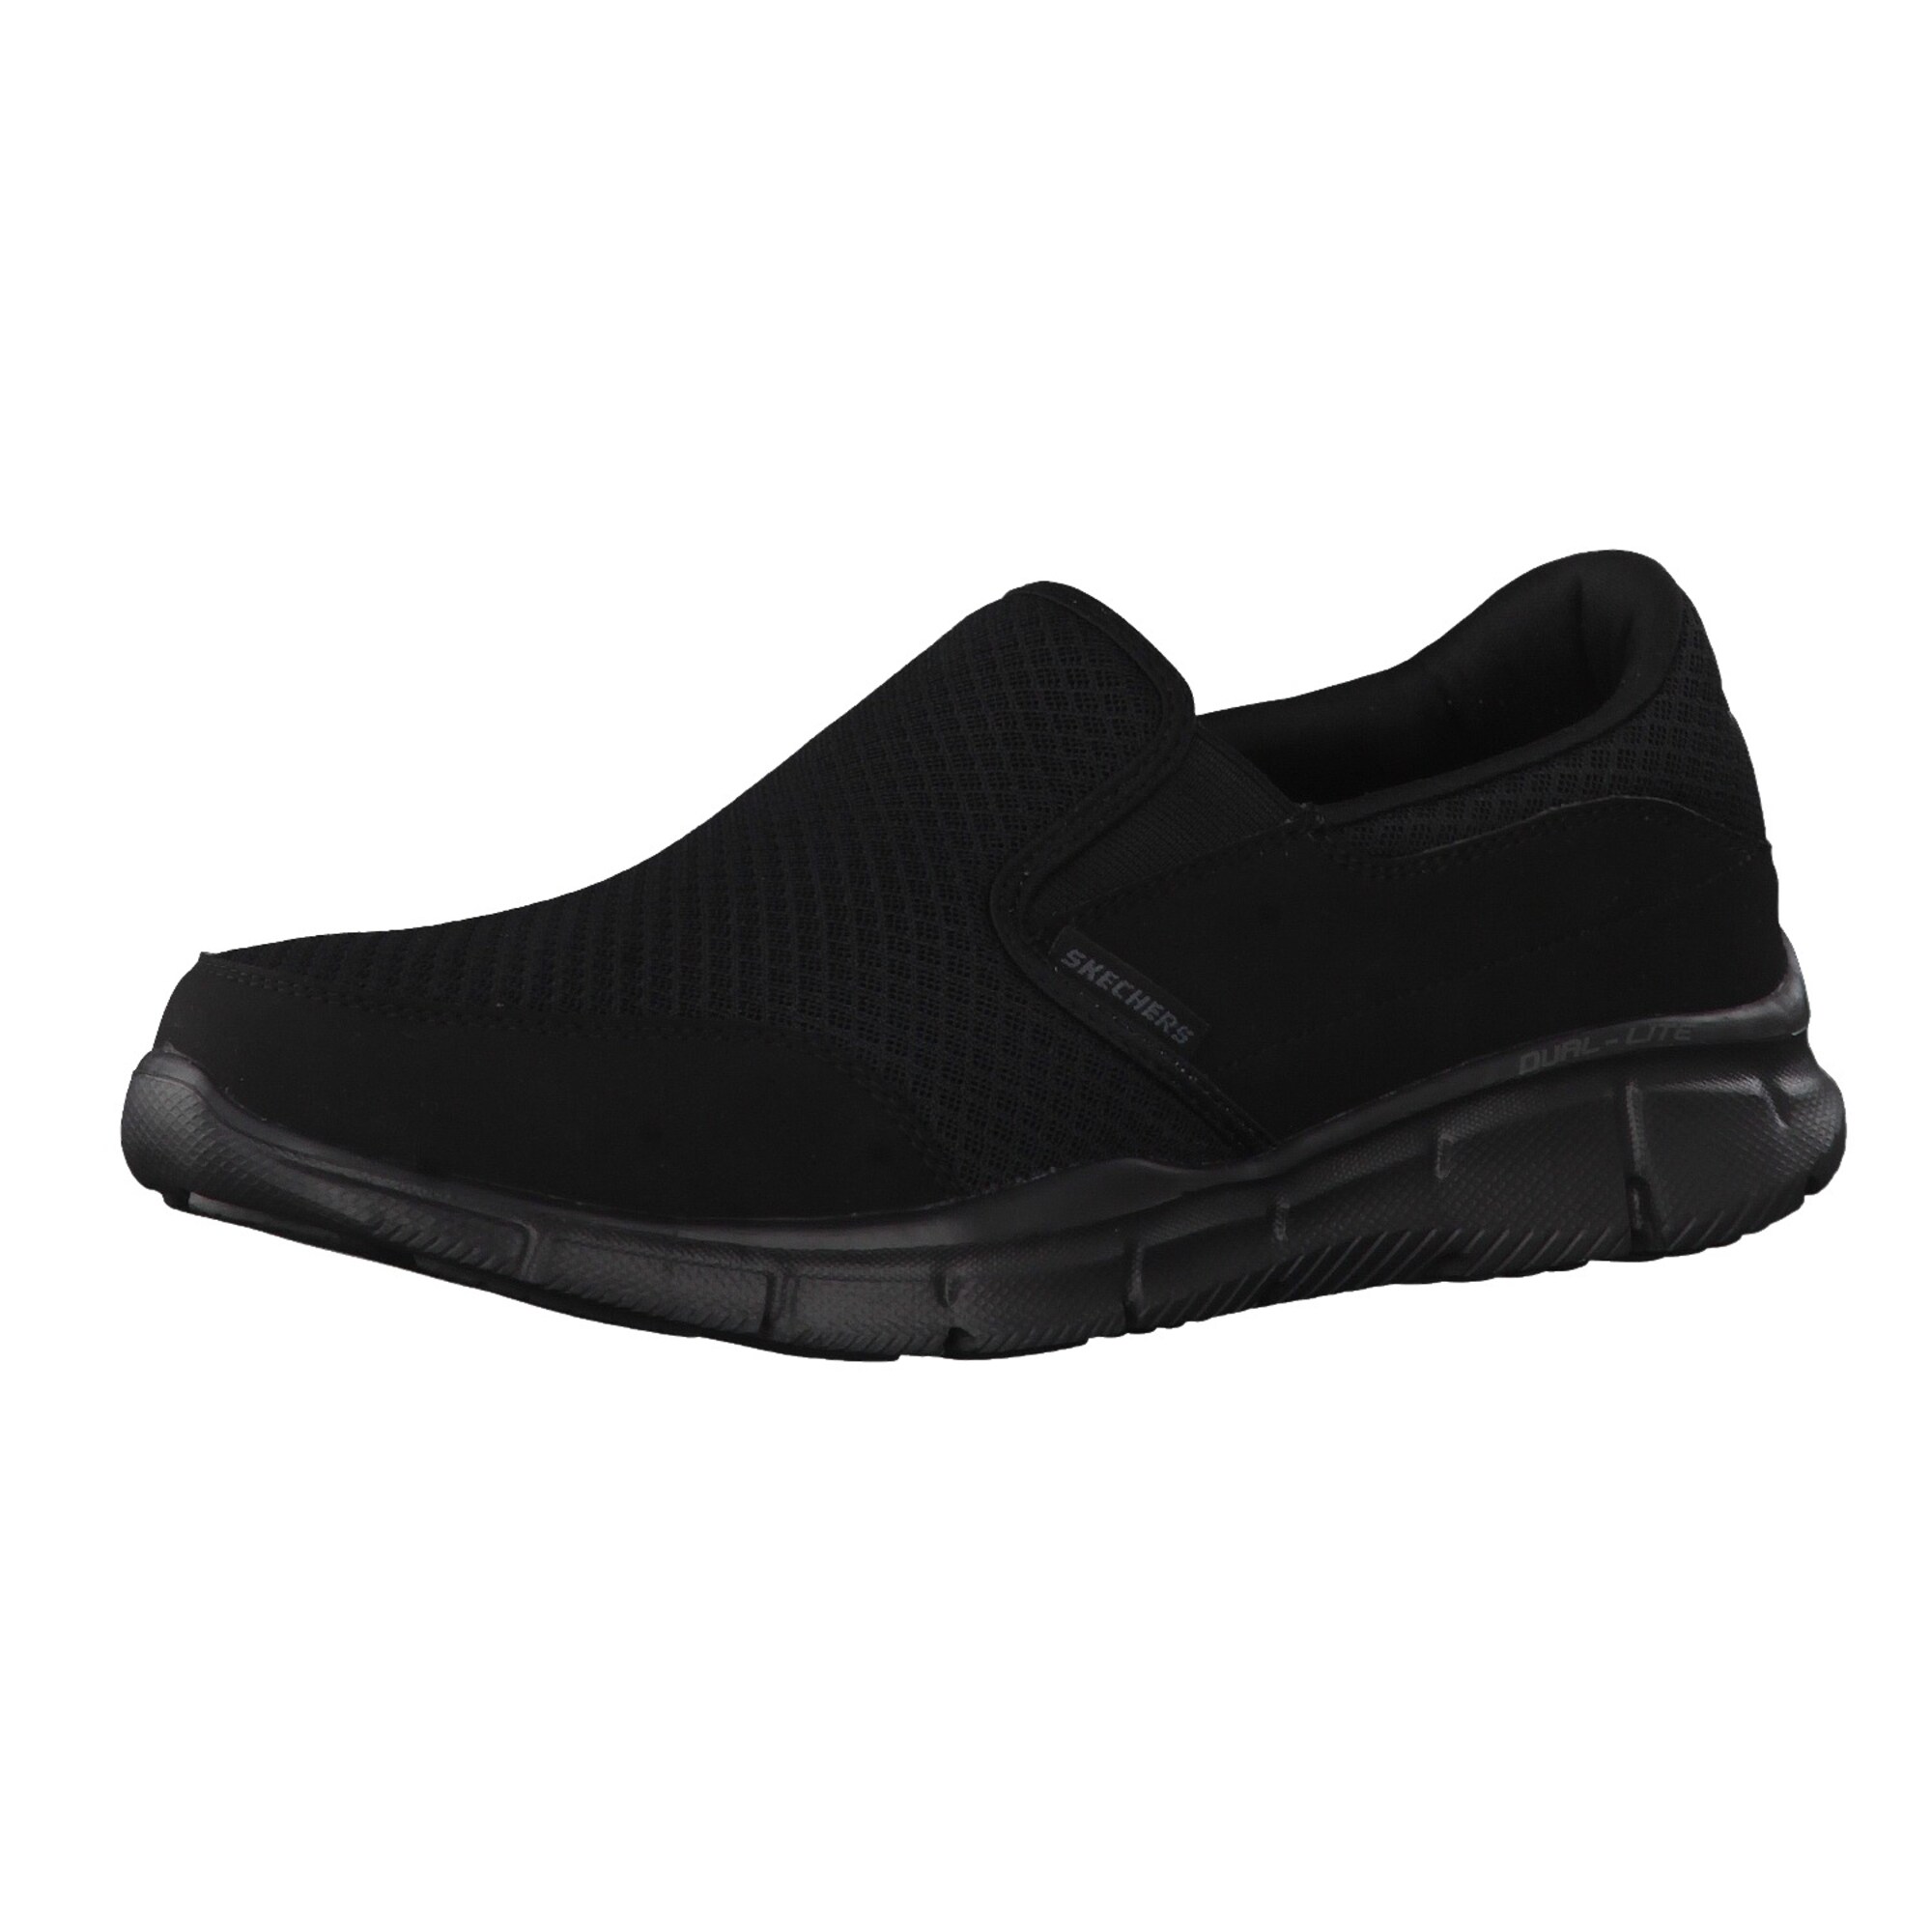 Instappers 'Equalizer Persistent' Skechers